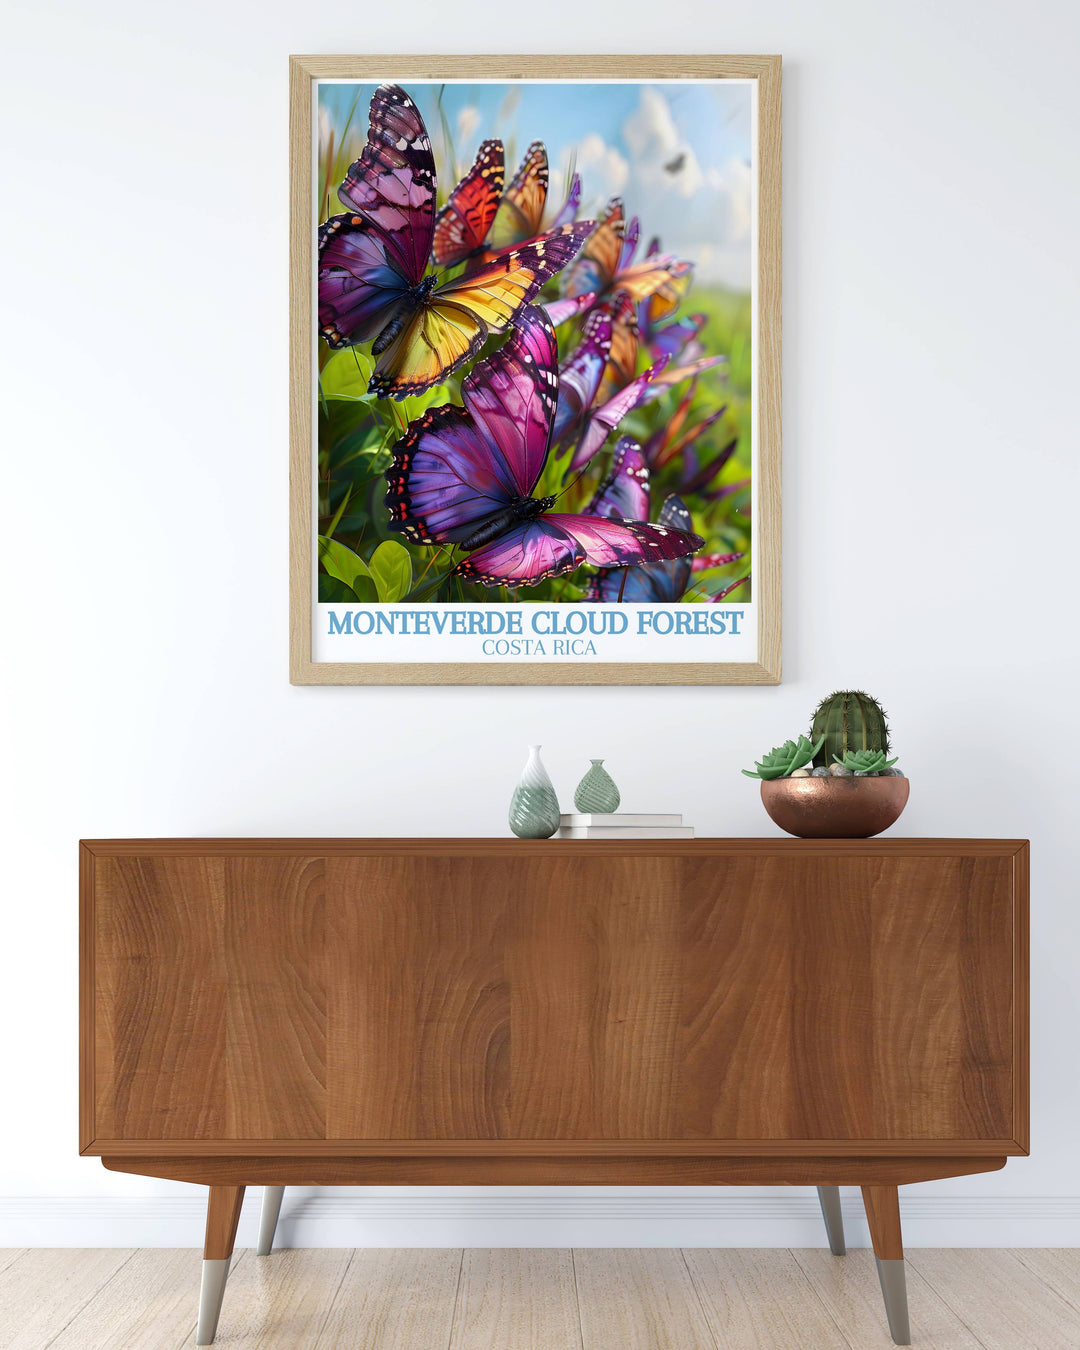 Custom print of the Monteverde Butterfly Garden tailored to showcase specific butterflies, ideal for enthusiasts and collectors.